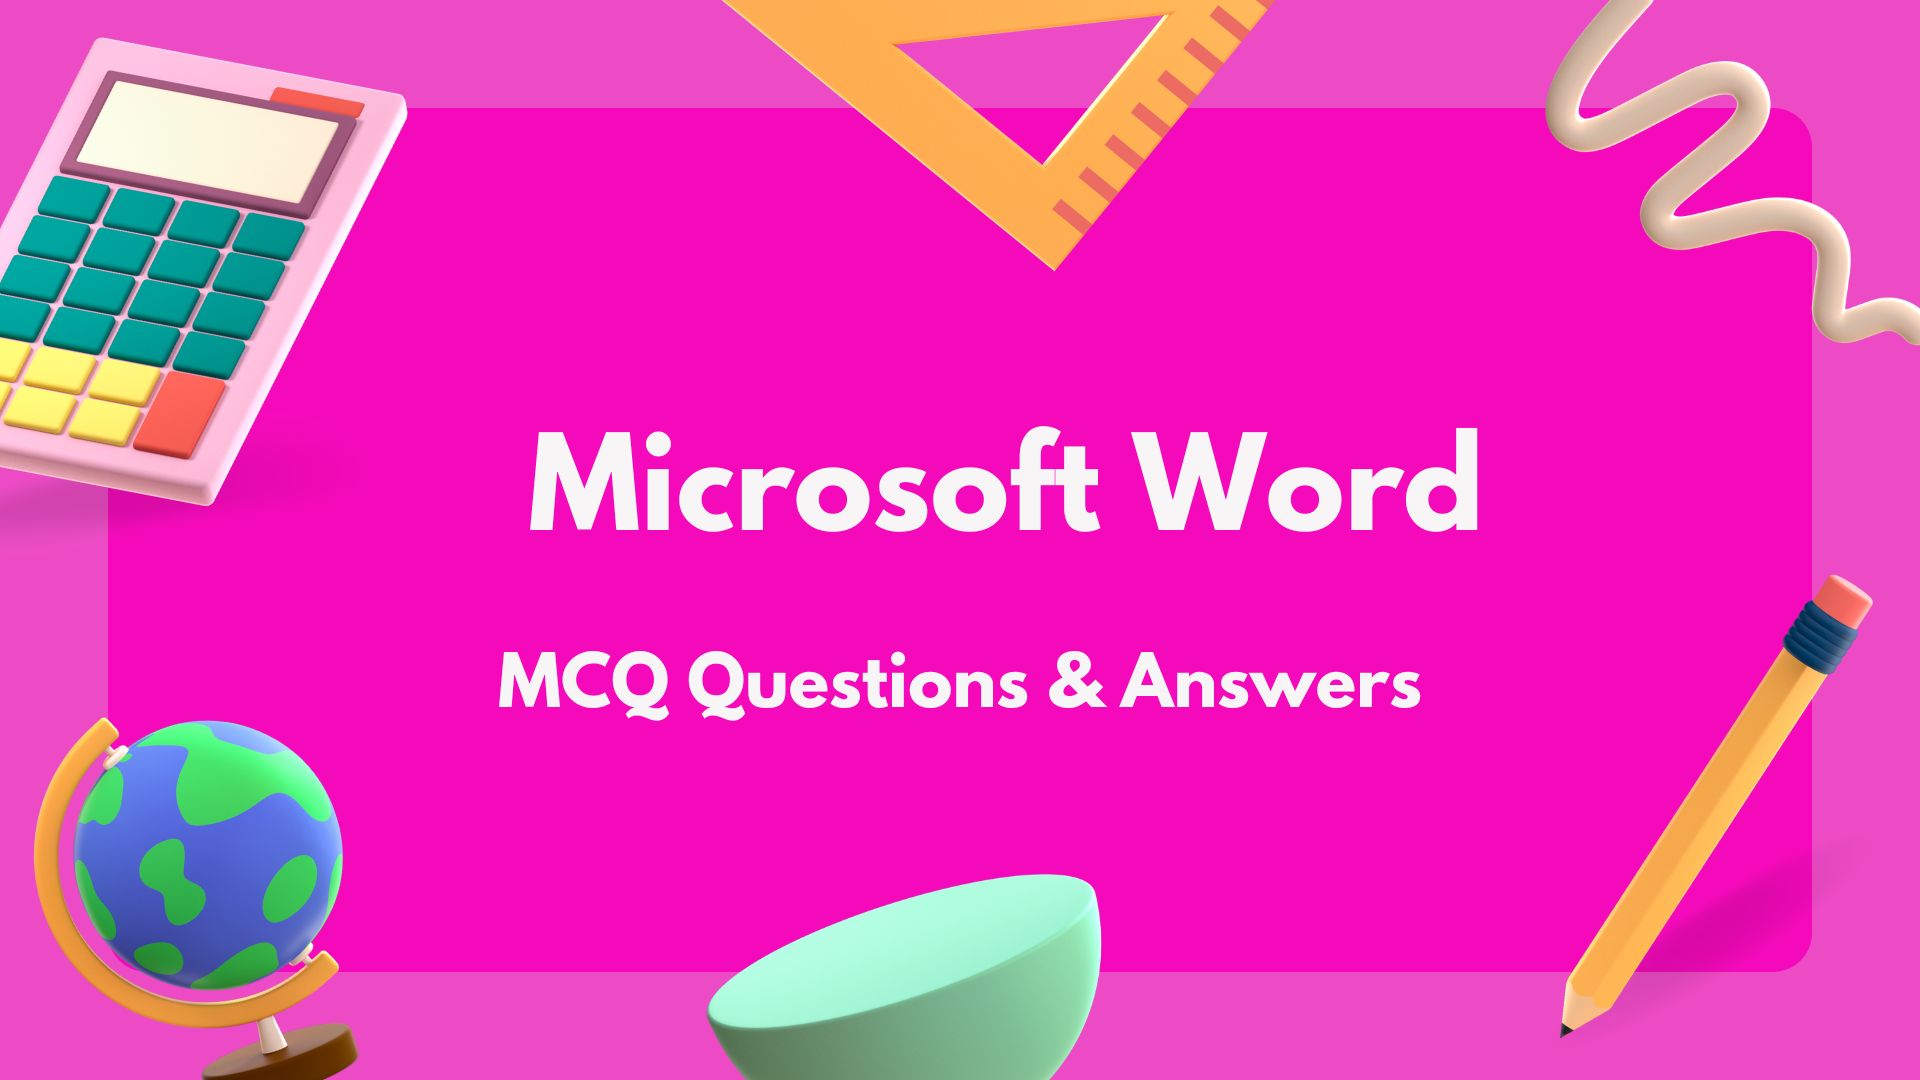 Microsoft Word MCQ Questions & Answers